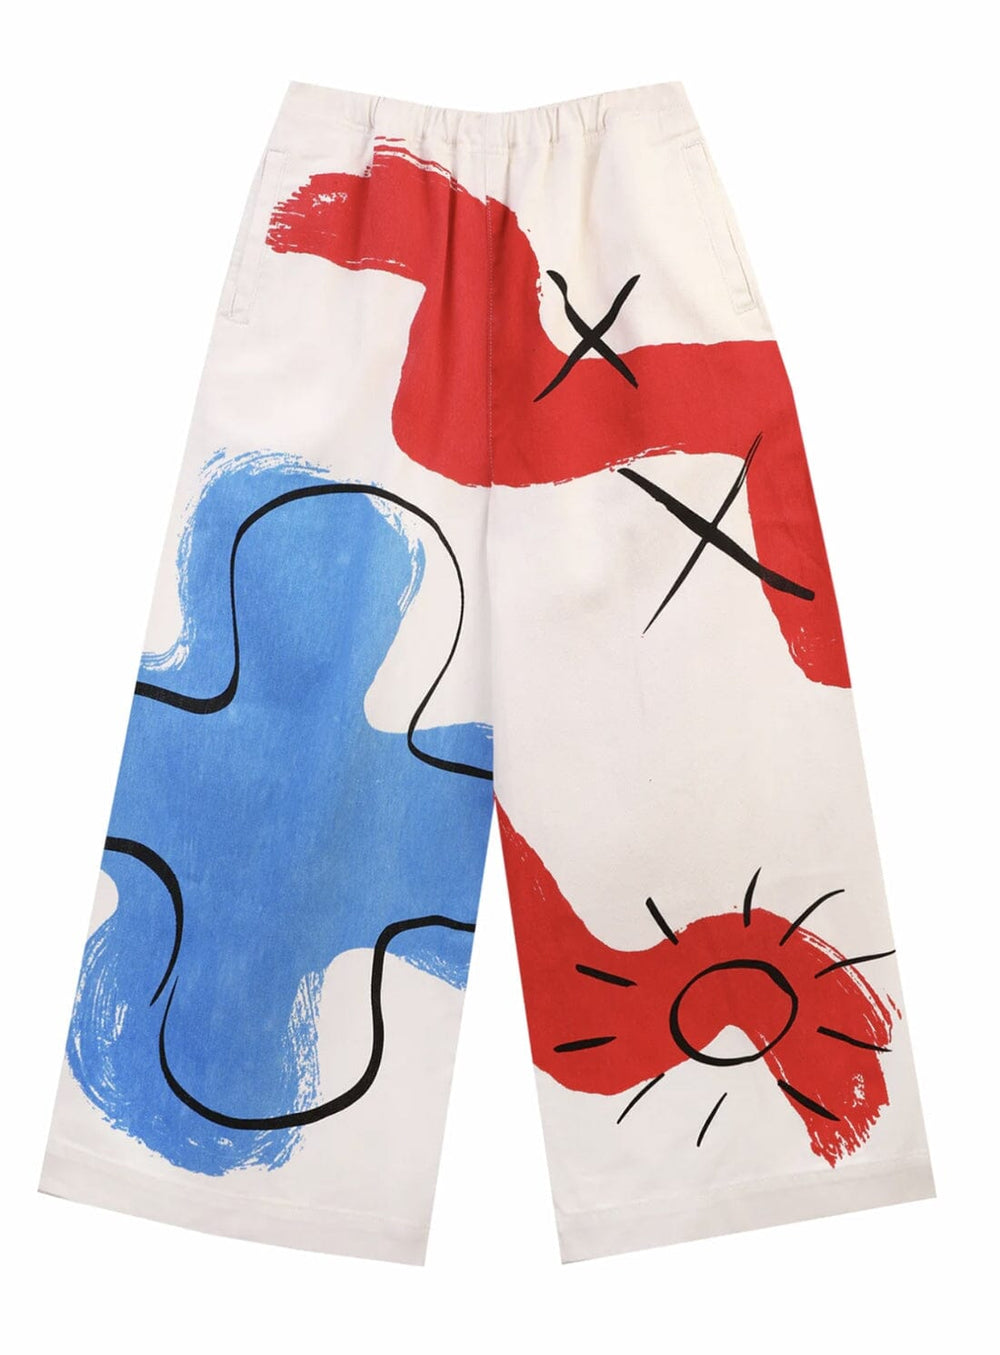 Ellis Trousers in Soller Print Trousers YBDFinds 